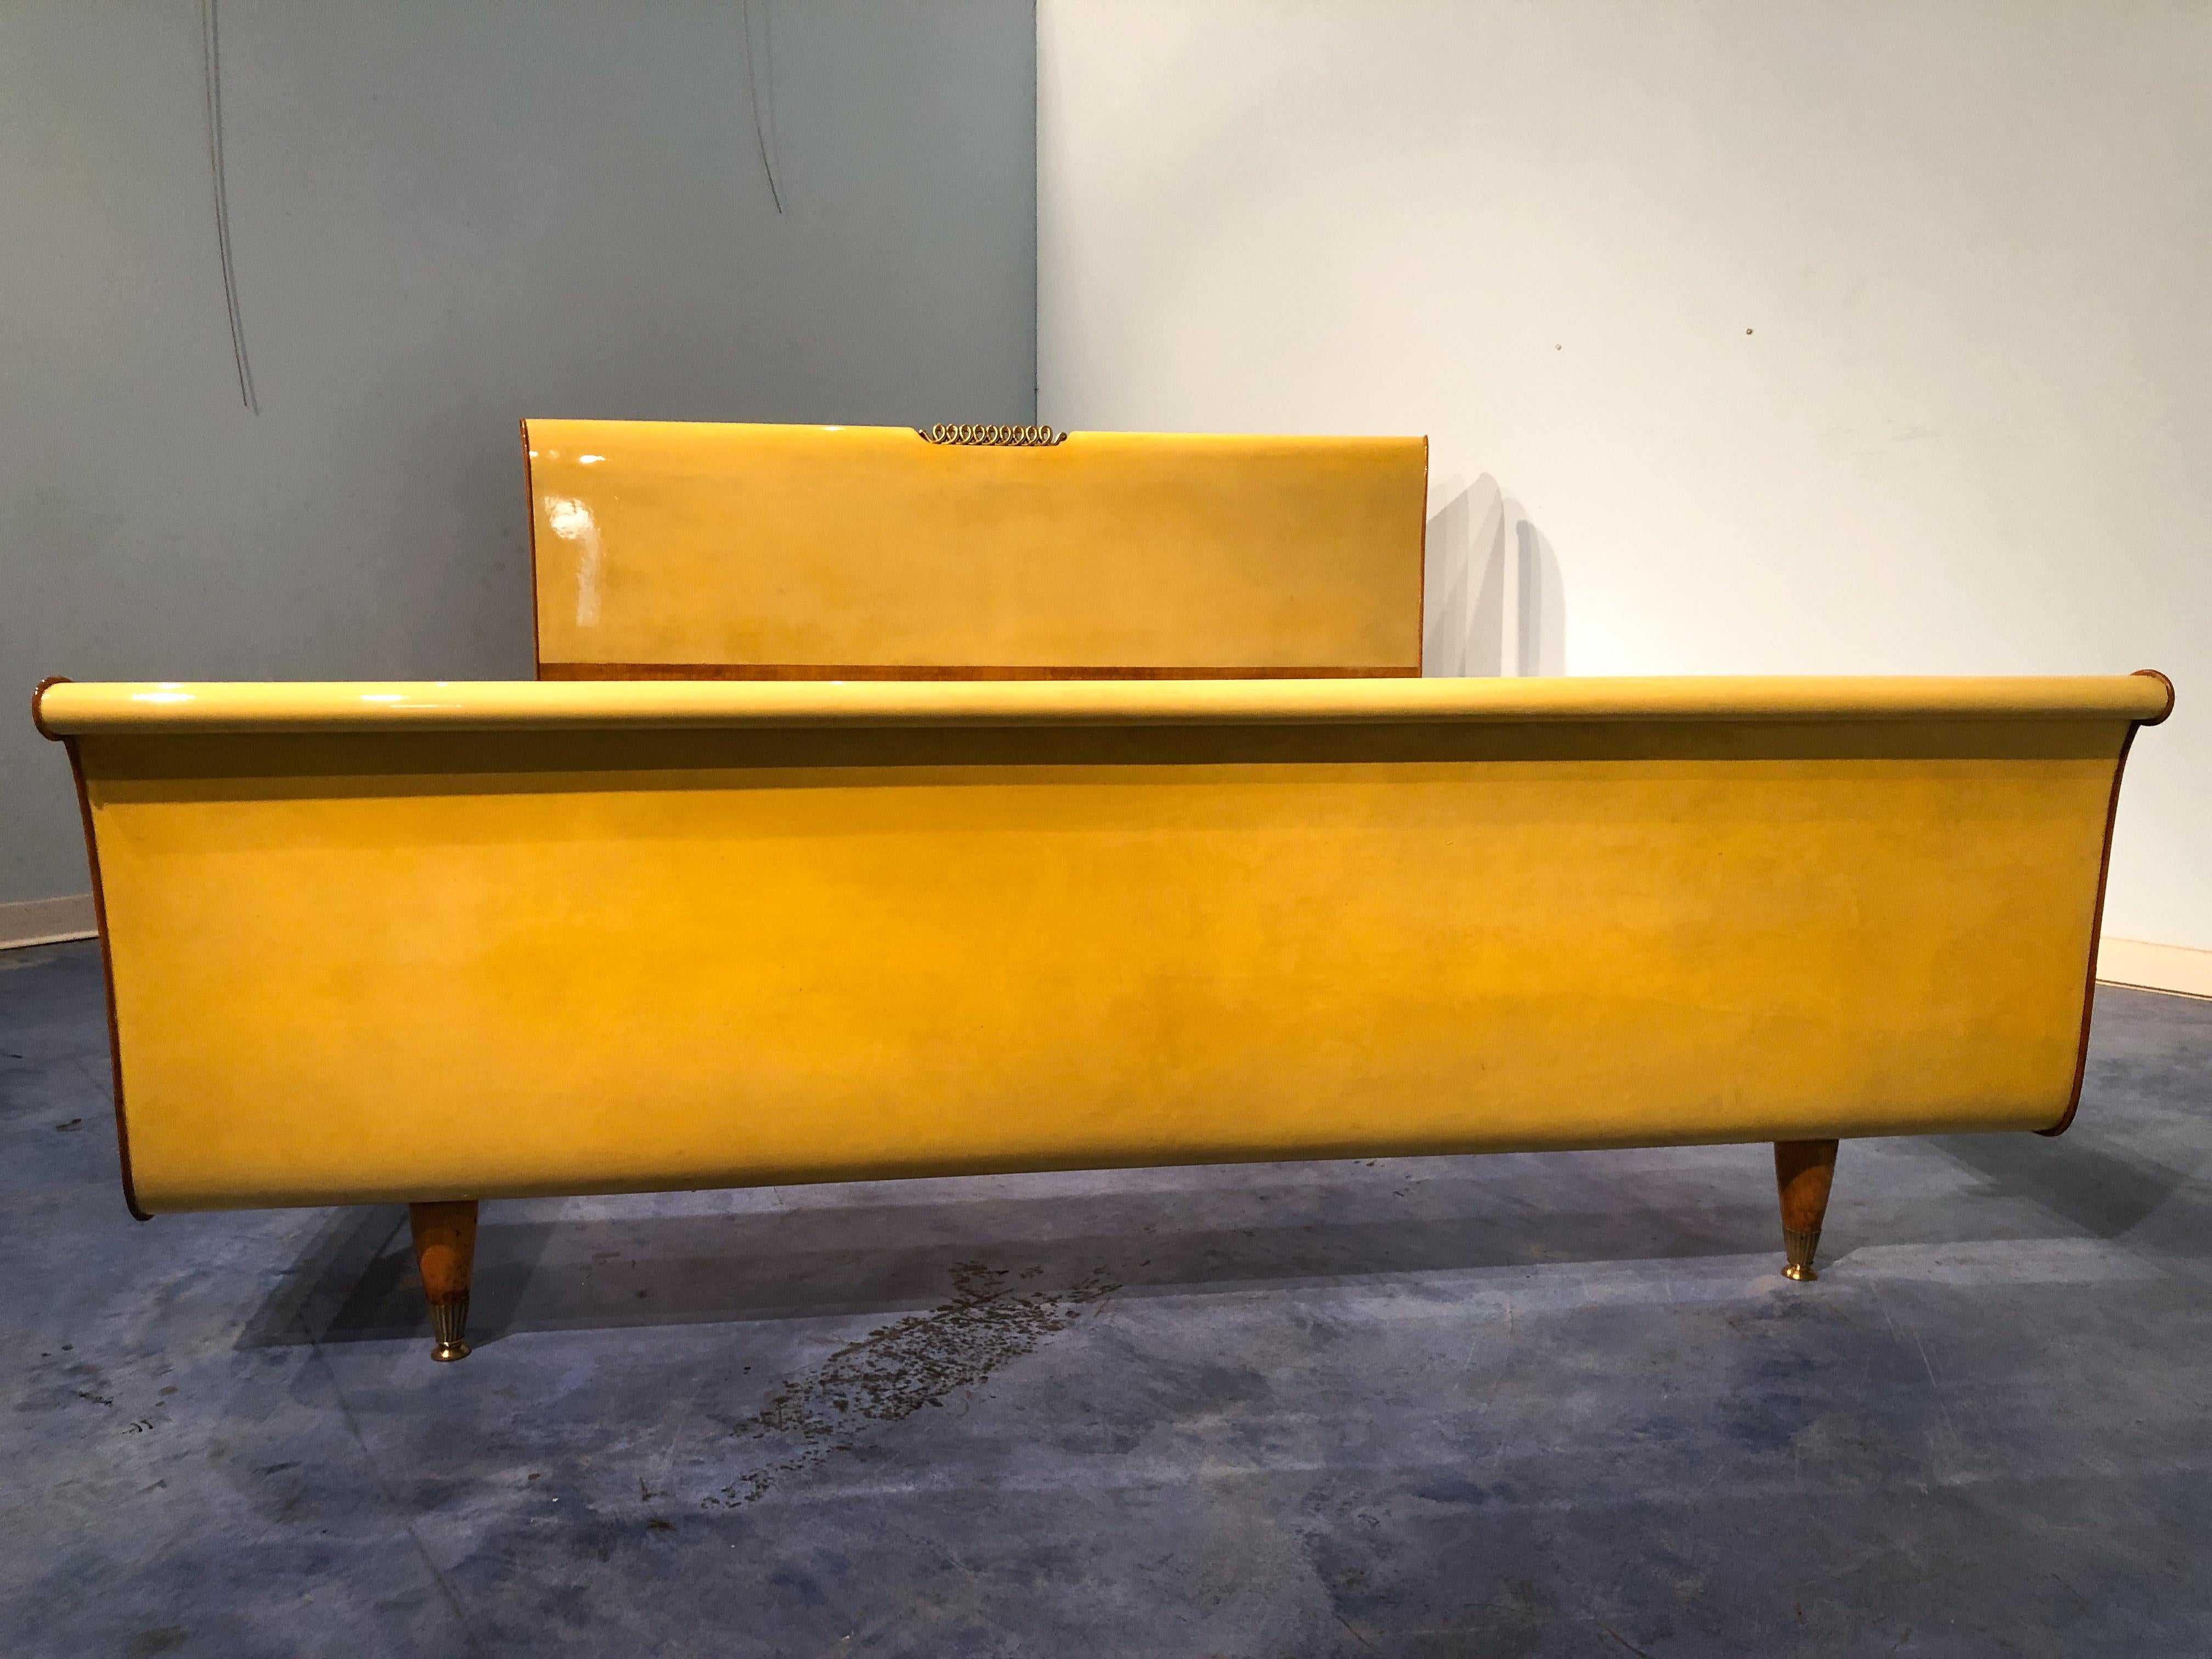 Italian Mid-Century Modern Parchment Bed Frame, 1950s For Sale 10